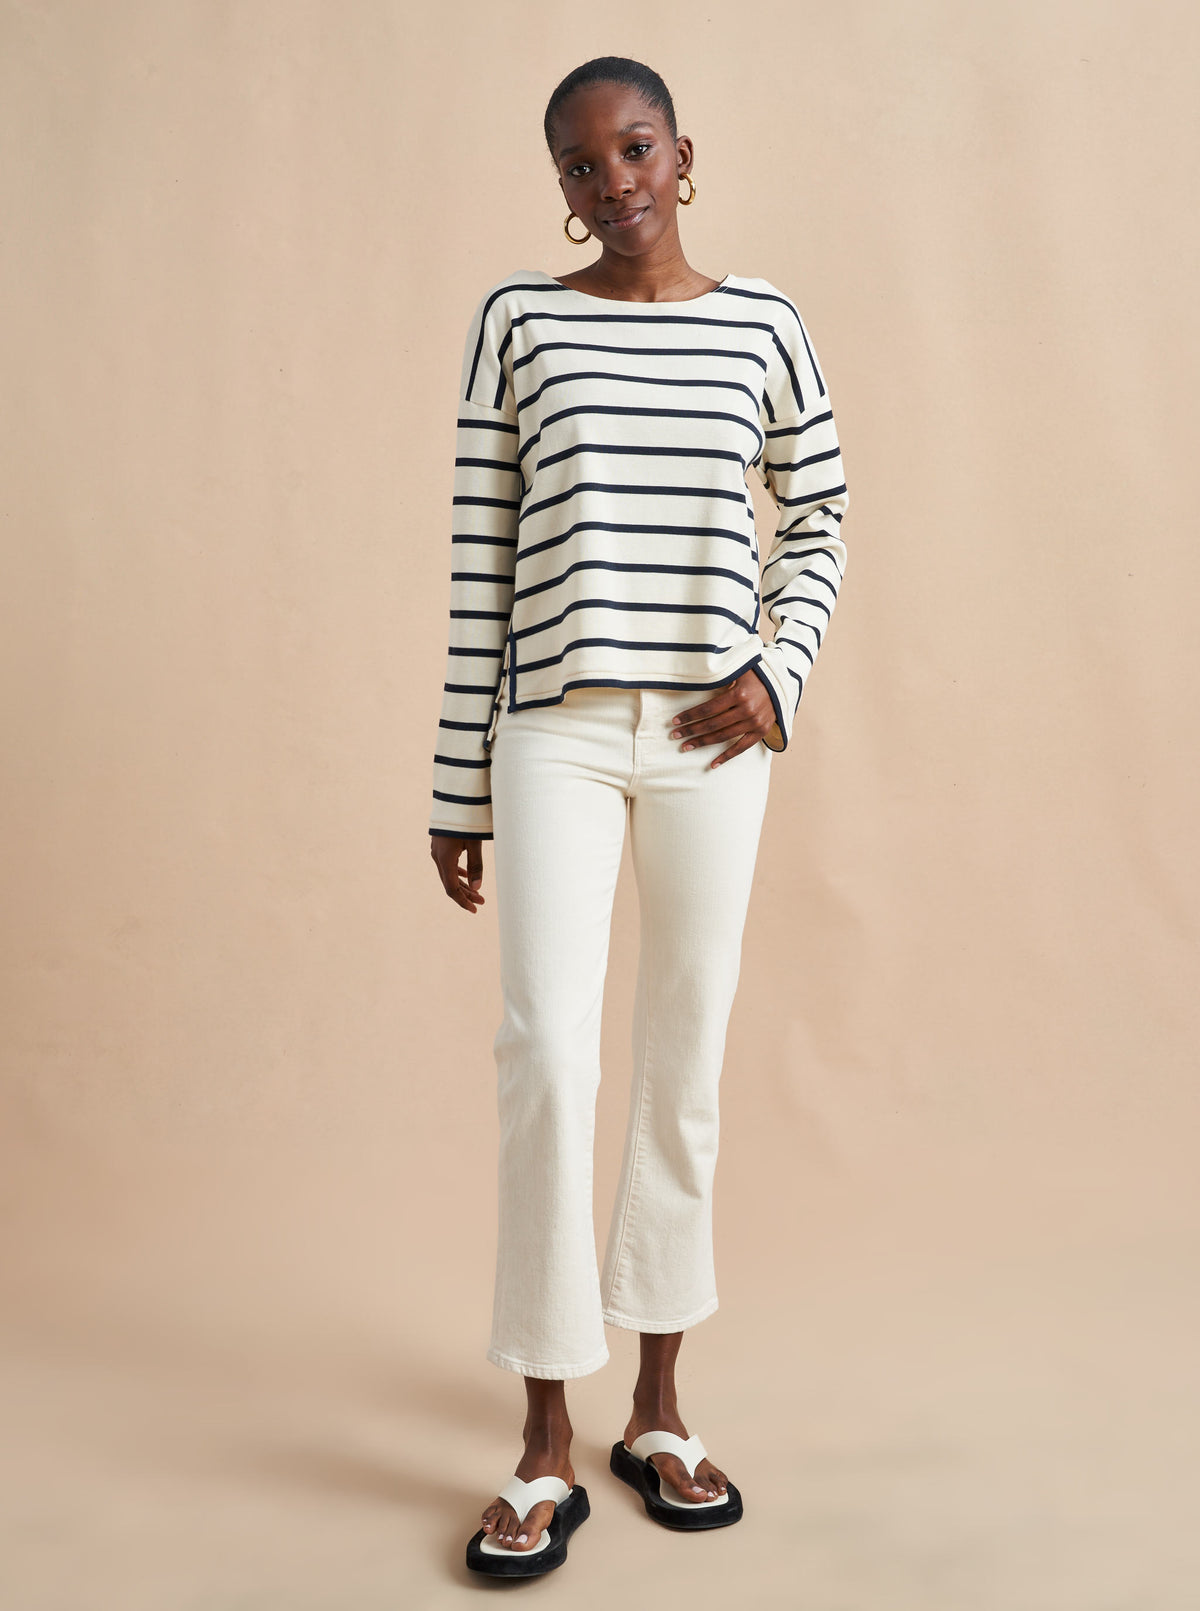 The epitome of quintessential Breton style, this long sleeve tee does it all in 100% super soft cream cotton with navy stripes.